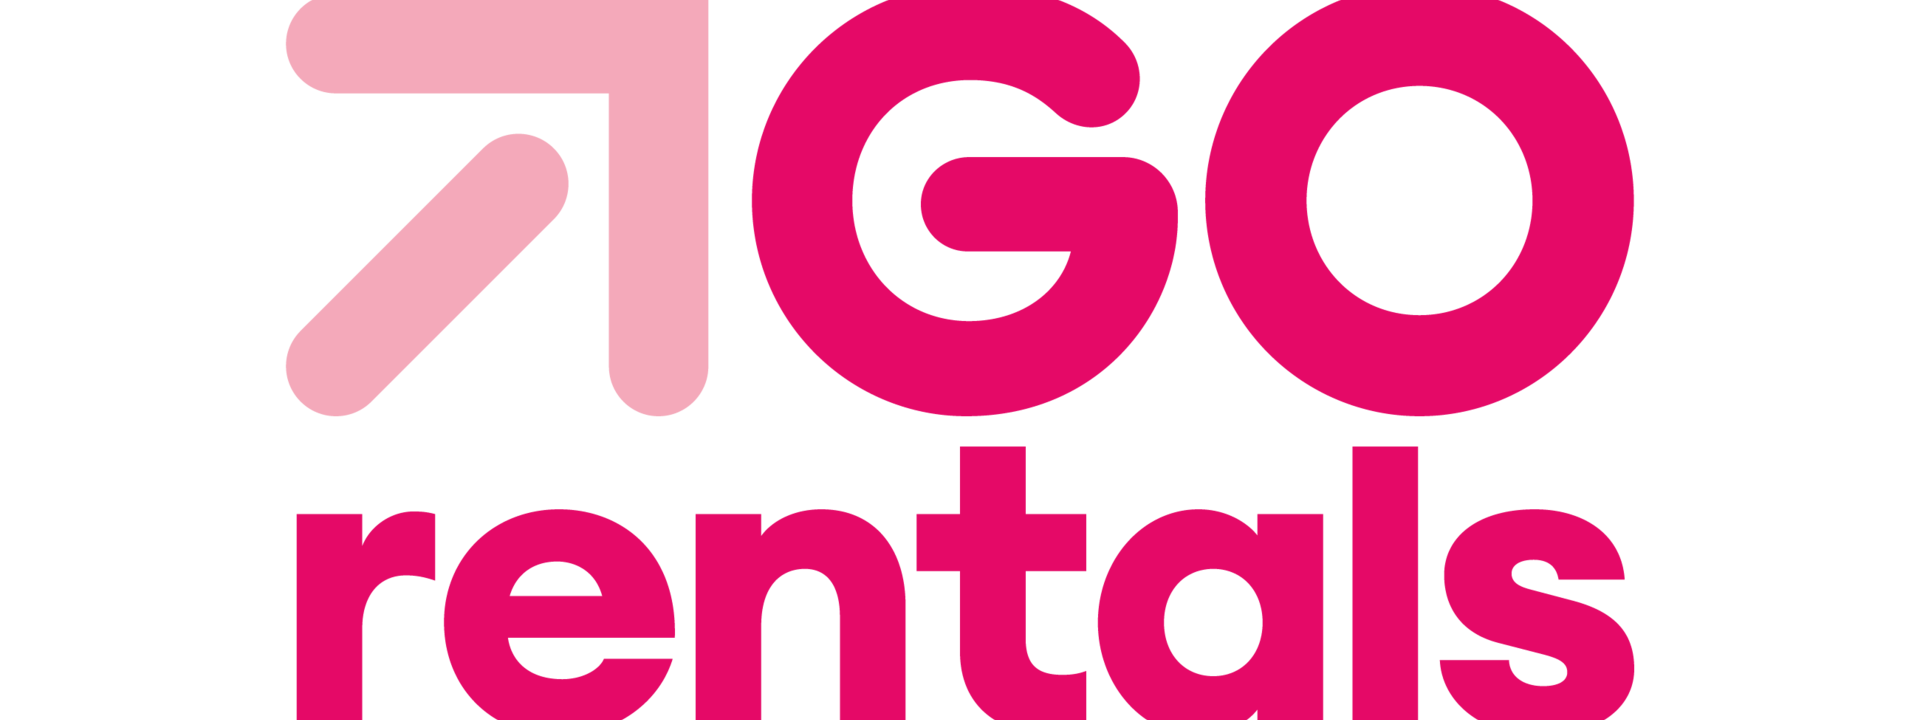 GORE1005_GORentals_Logo_Pink_AW_STACK SMALL_4.png